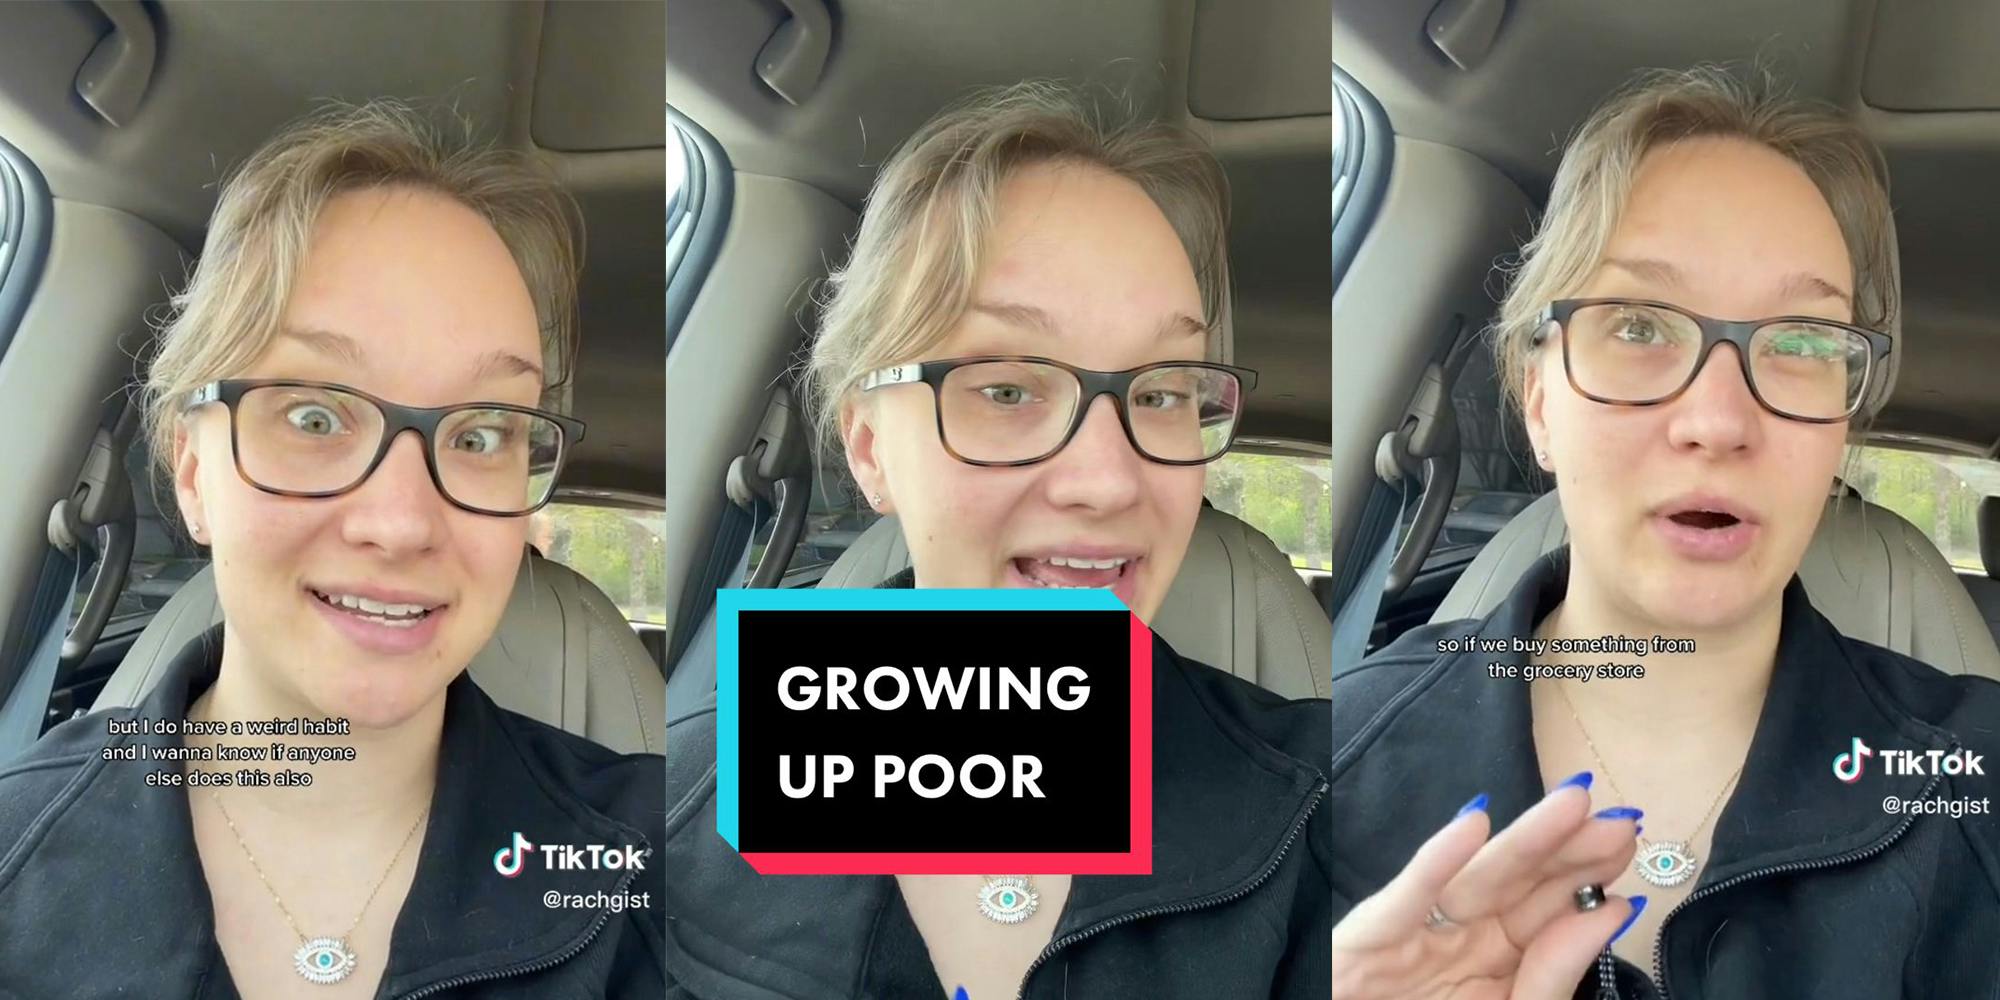 Woman shares the ‘poor trauma’ habit she learned from growing up poor that she’s carried into adulthood